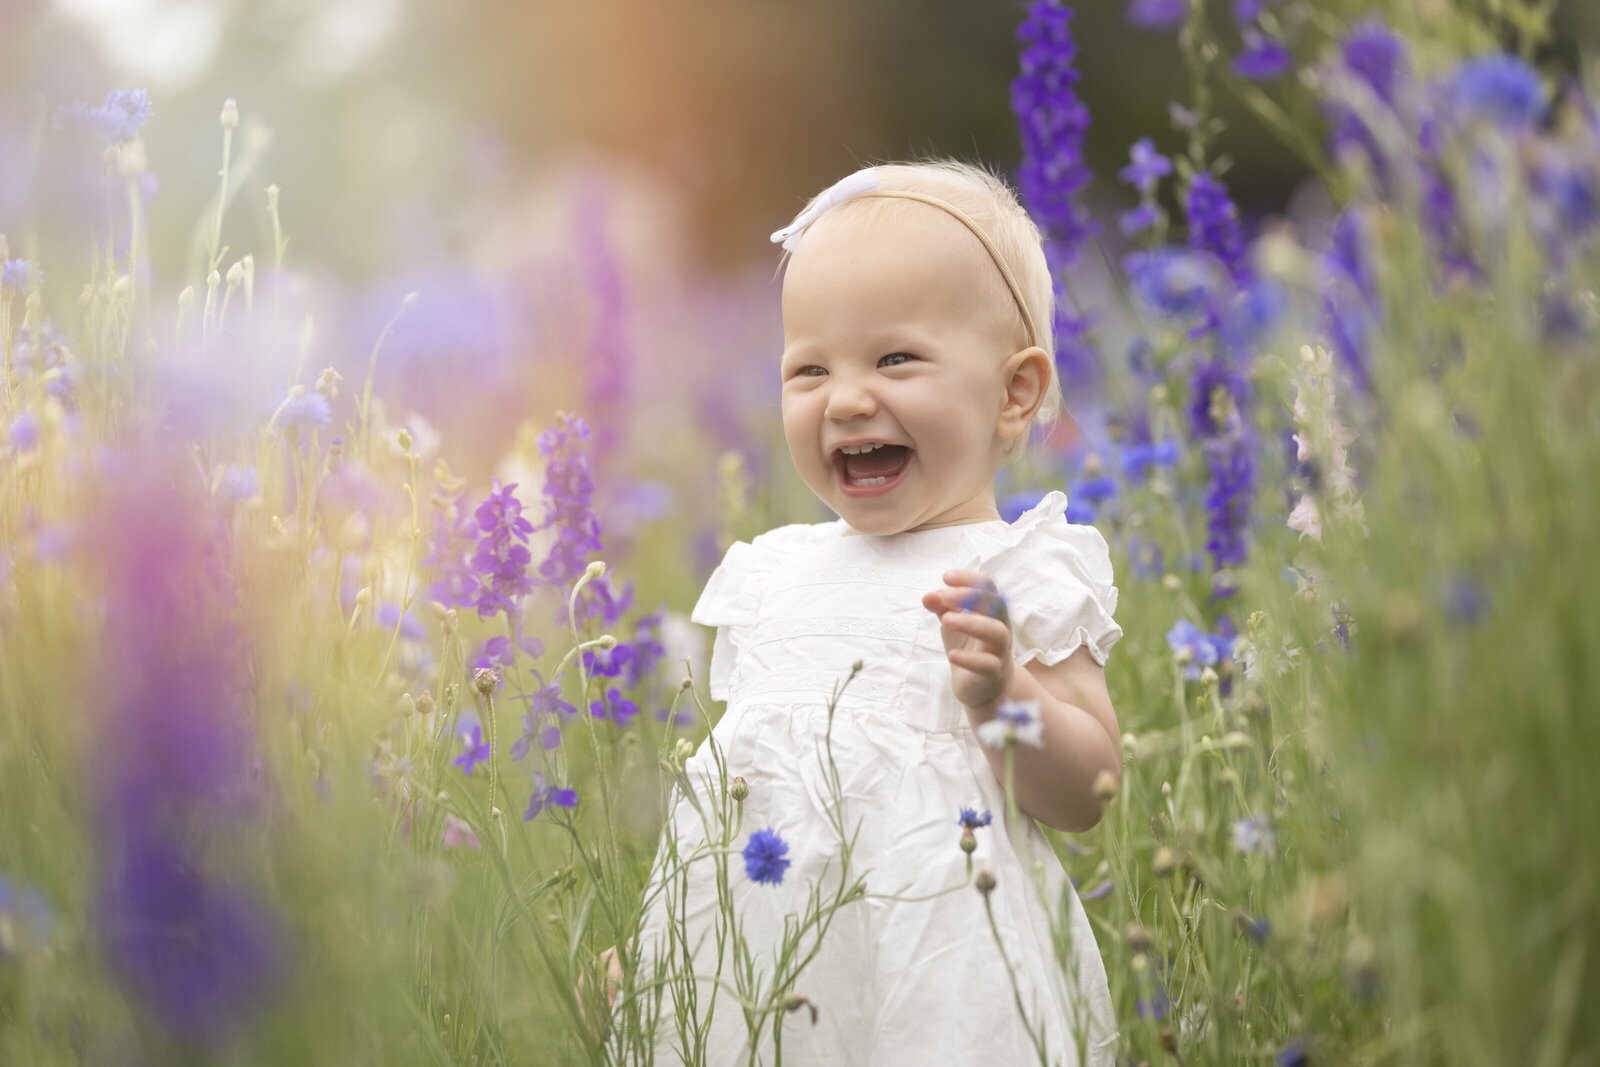 Toddler laughing in wildflowers photos